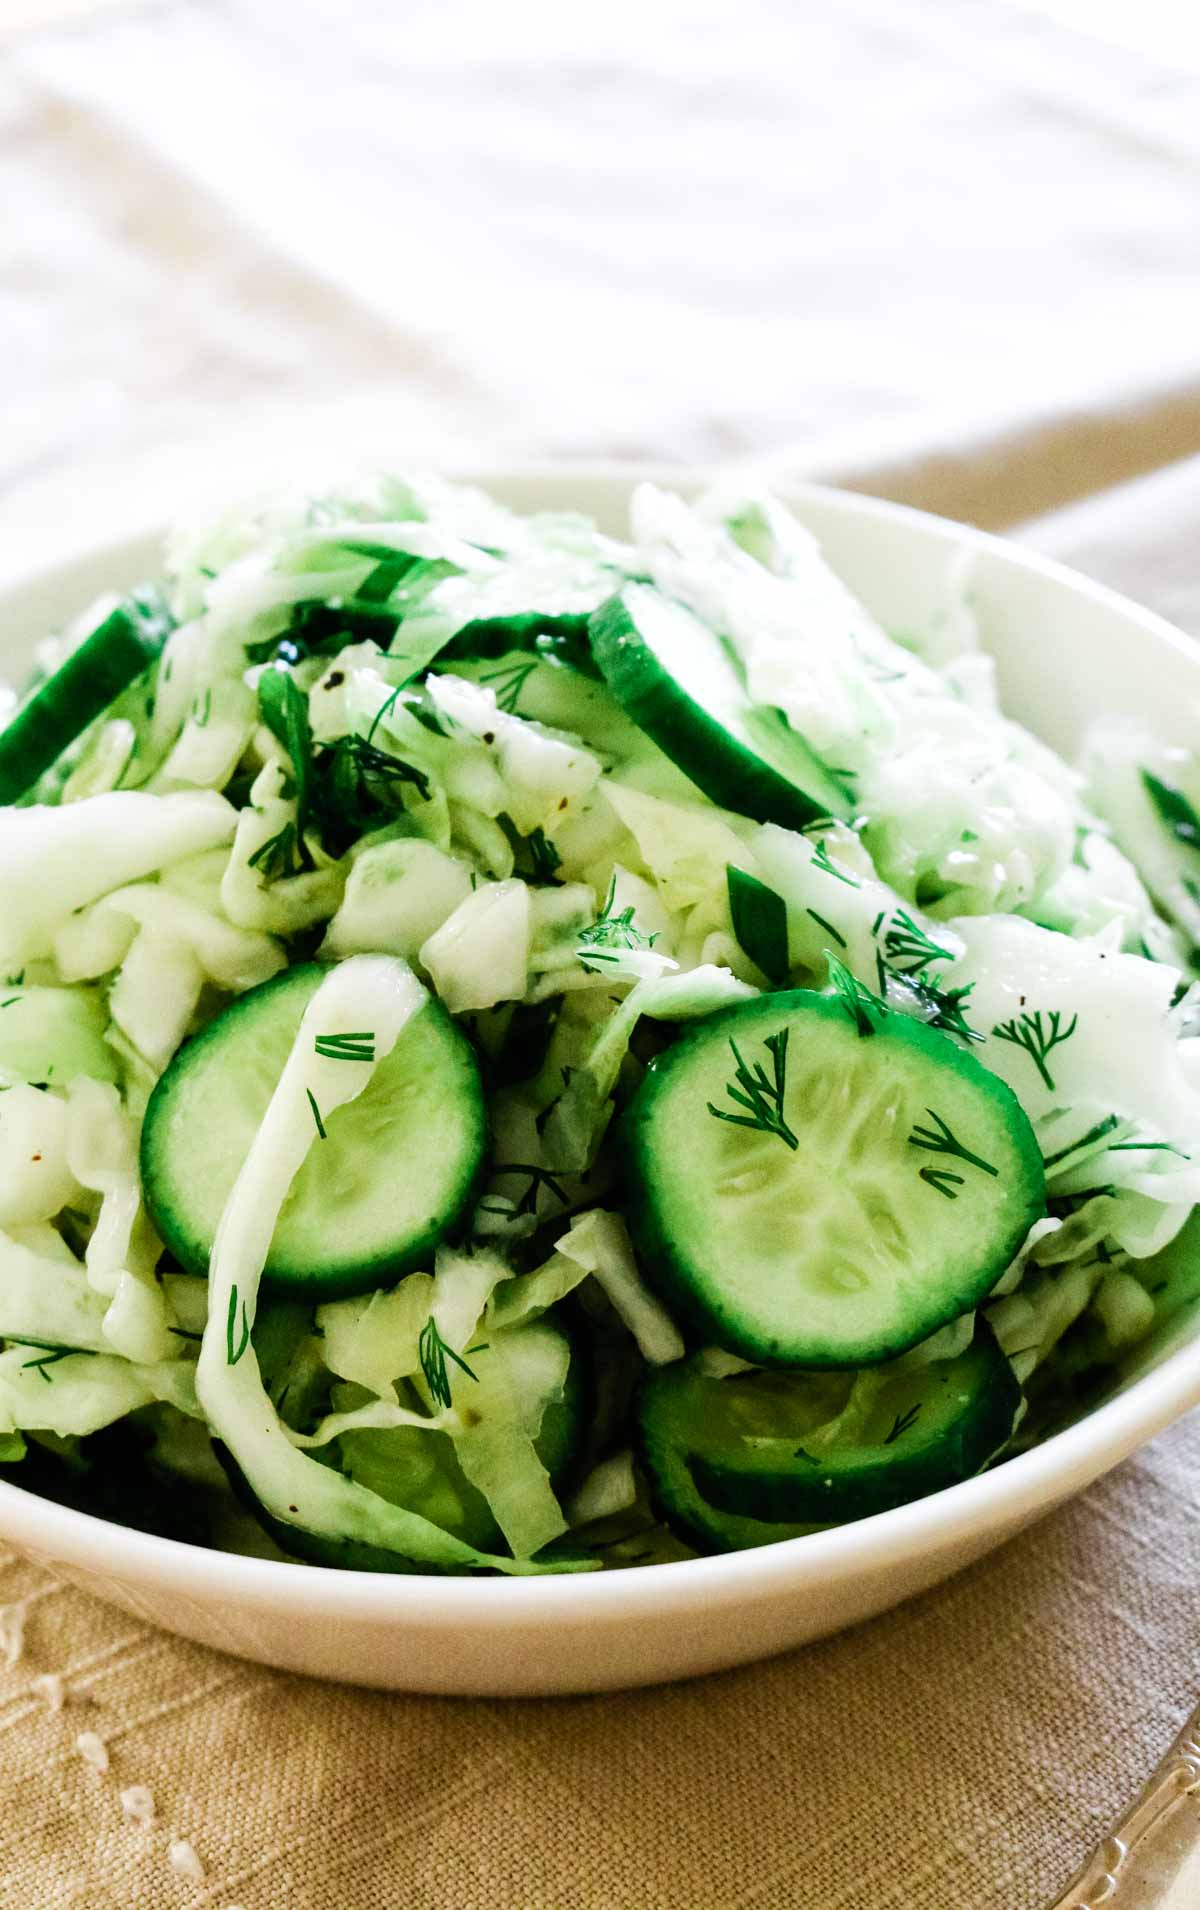 Shredded cabbage with cucumbers in a white bowl.